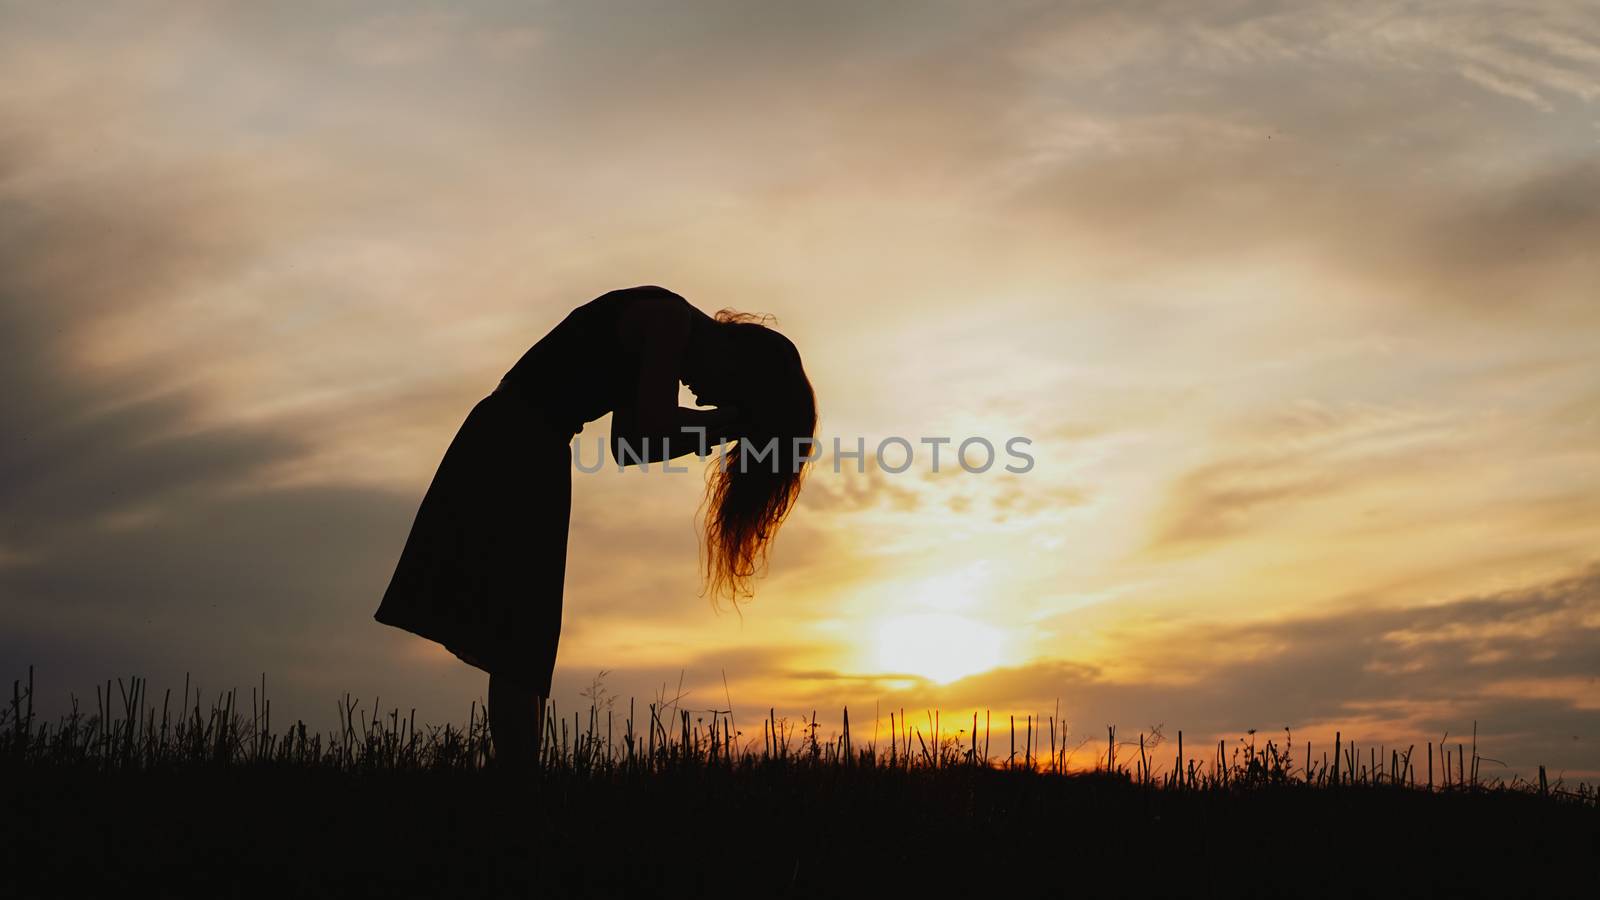 Silhouette of a young woman standing in dry grass field on bright sunset